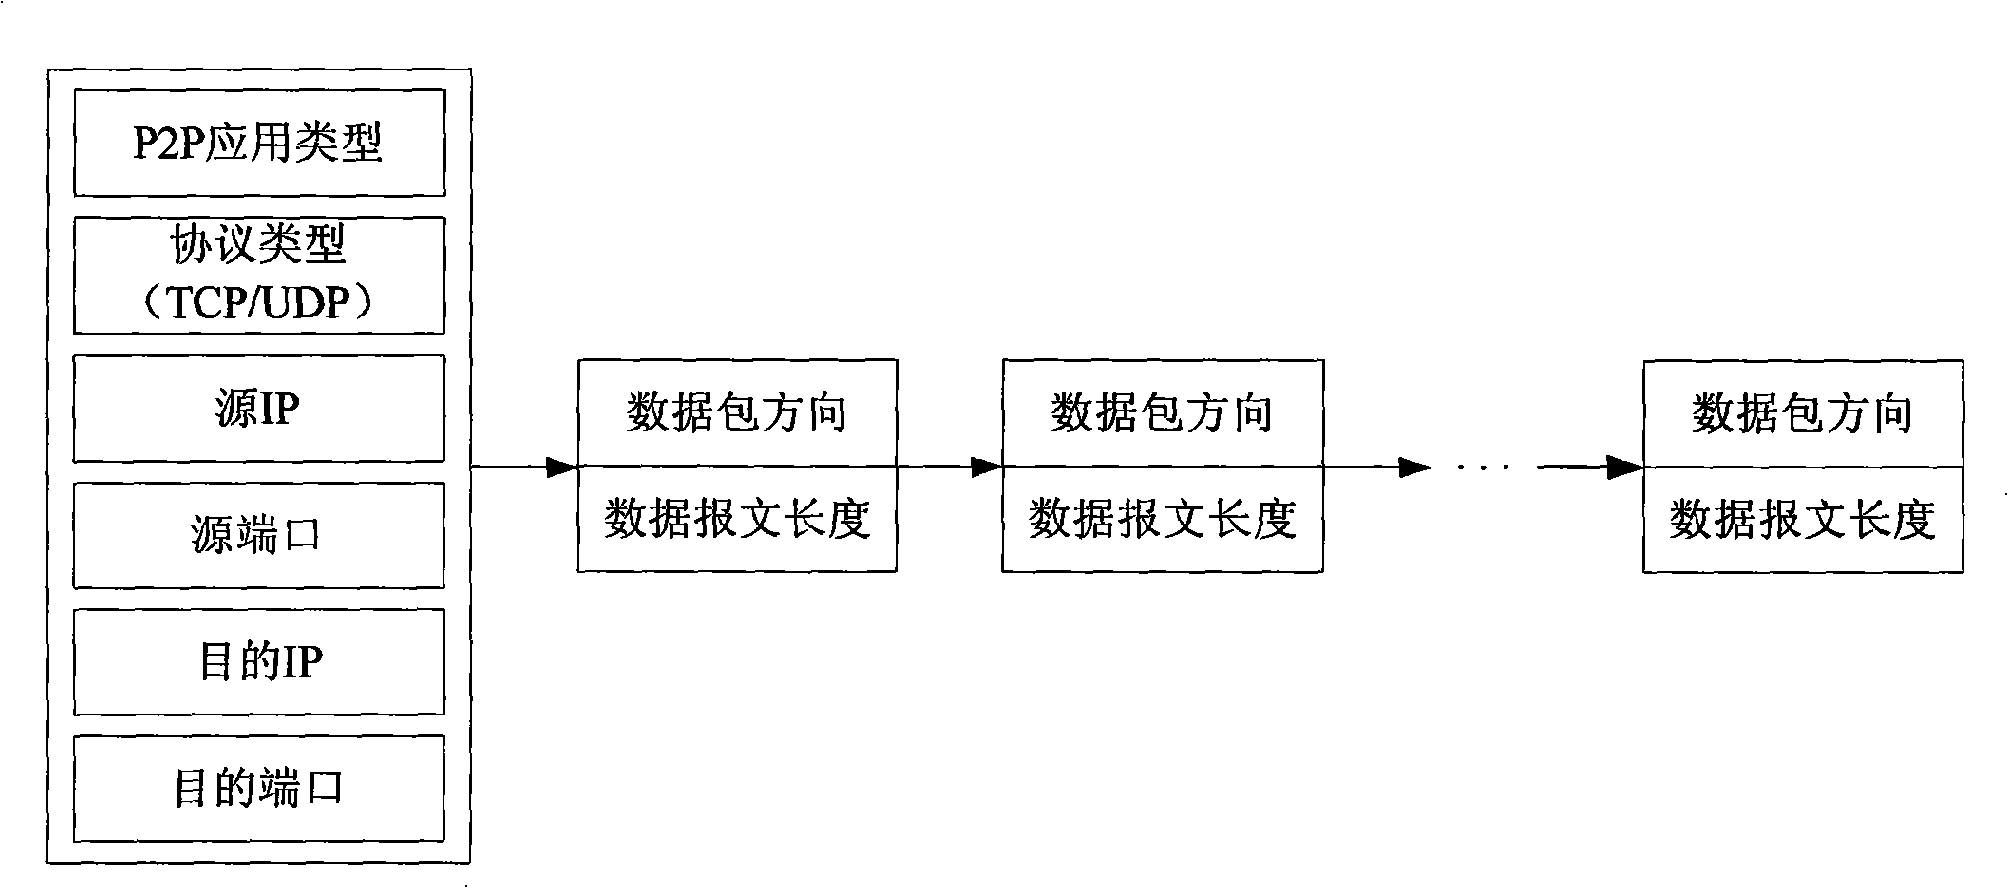 Method for recognizing P2P network flow based on transport layer characteristics